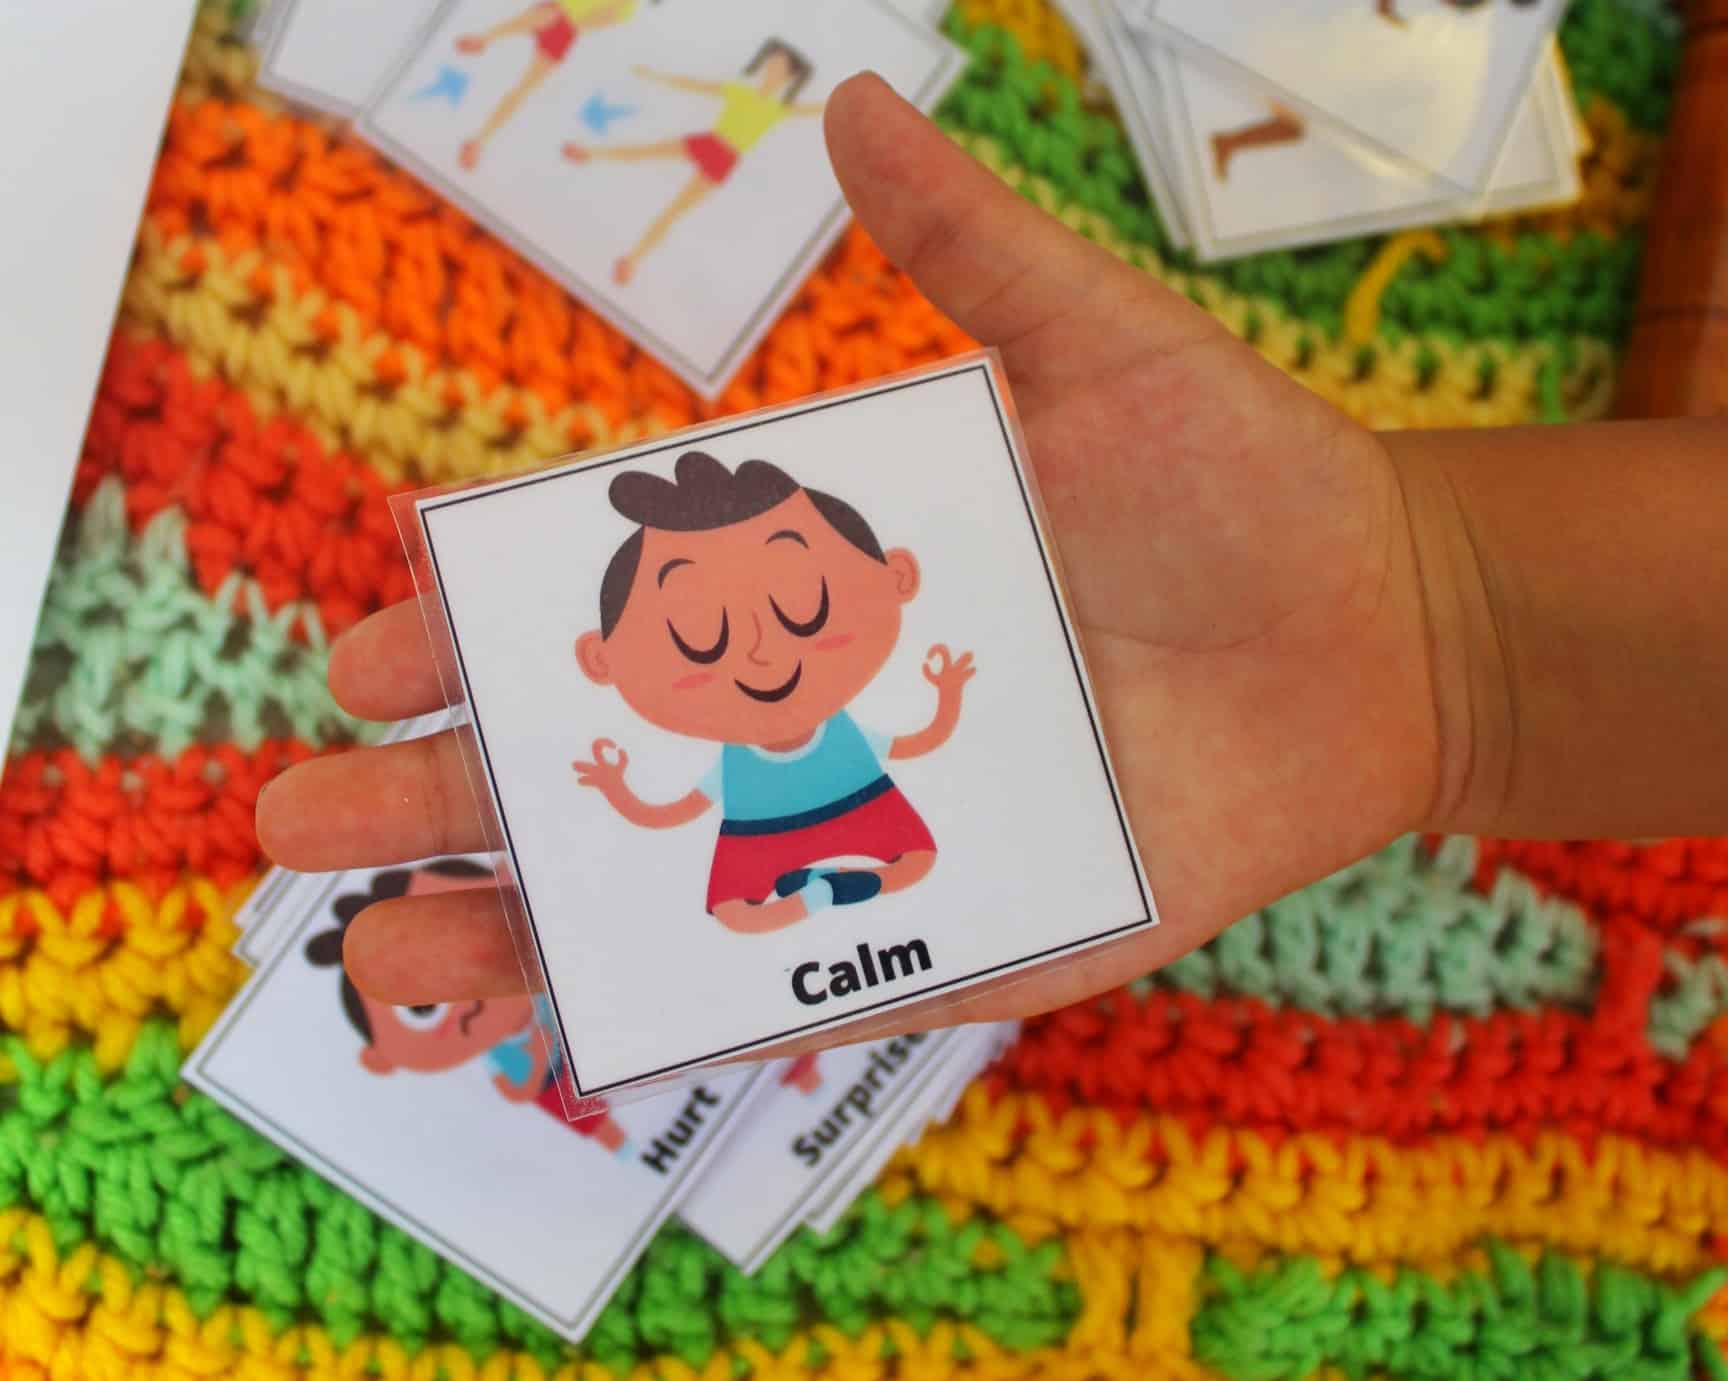 picture of childs hand holding calm card